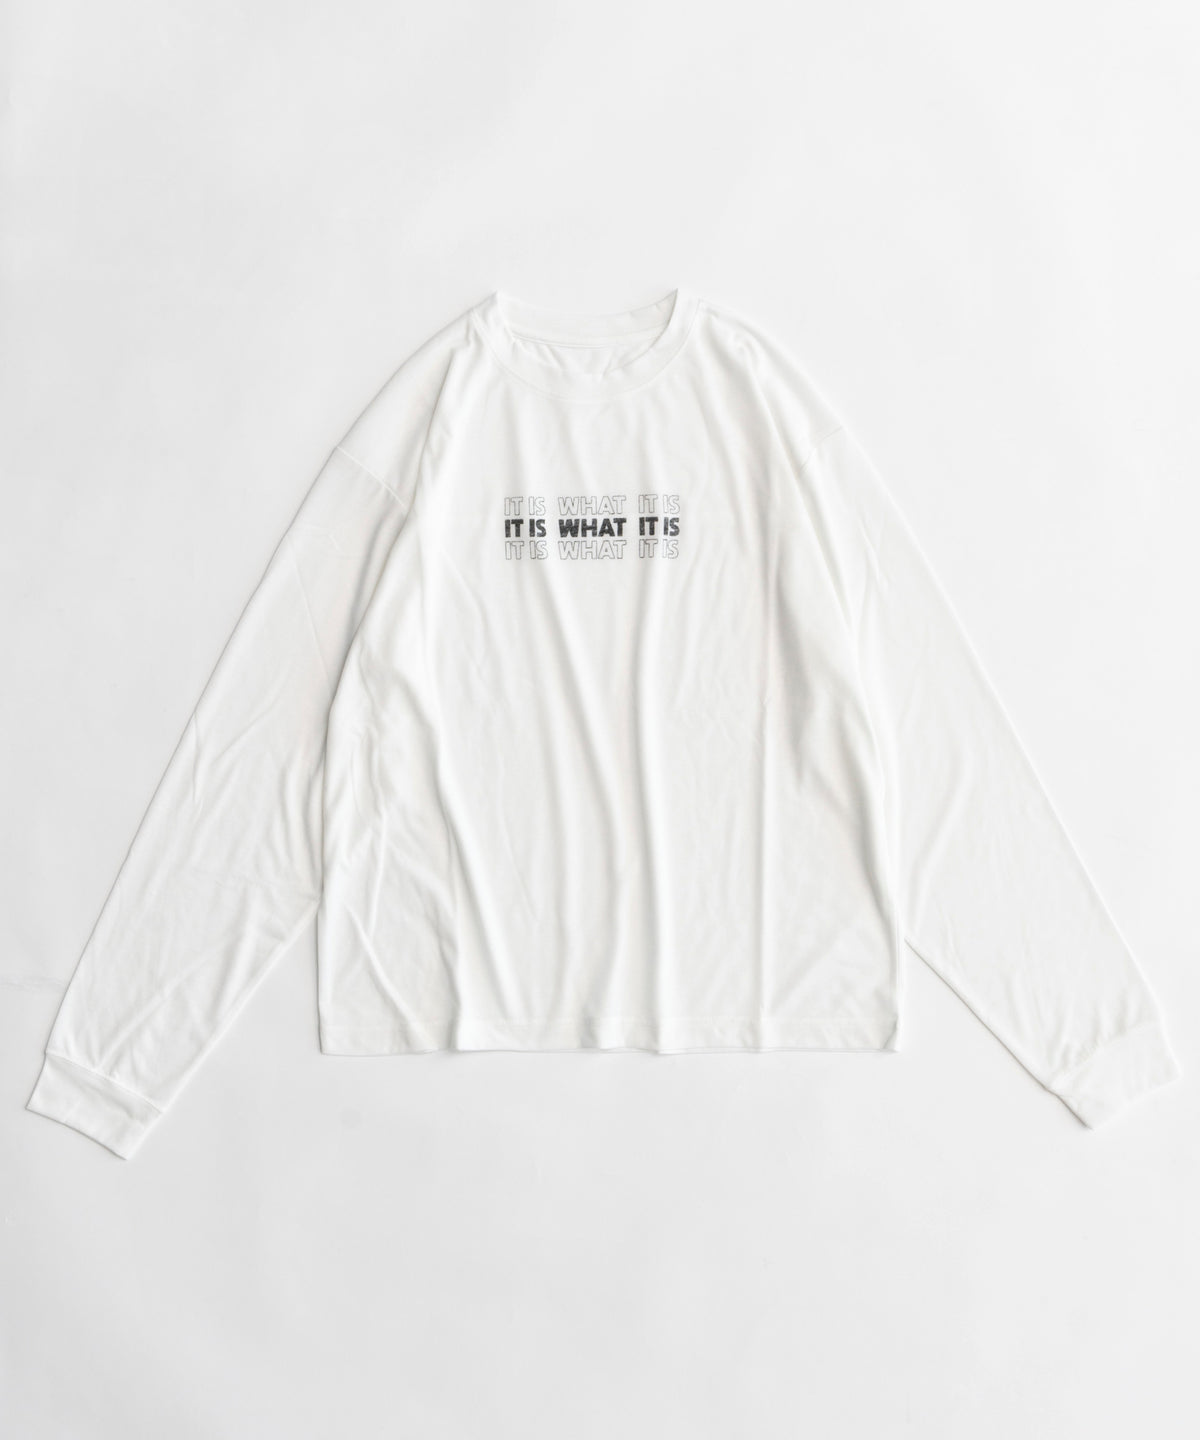 It's is what long sleeve T-shirt